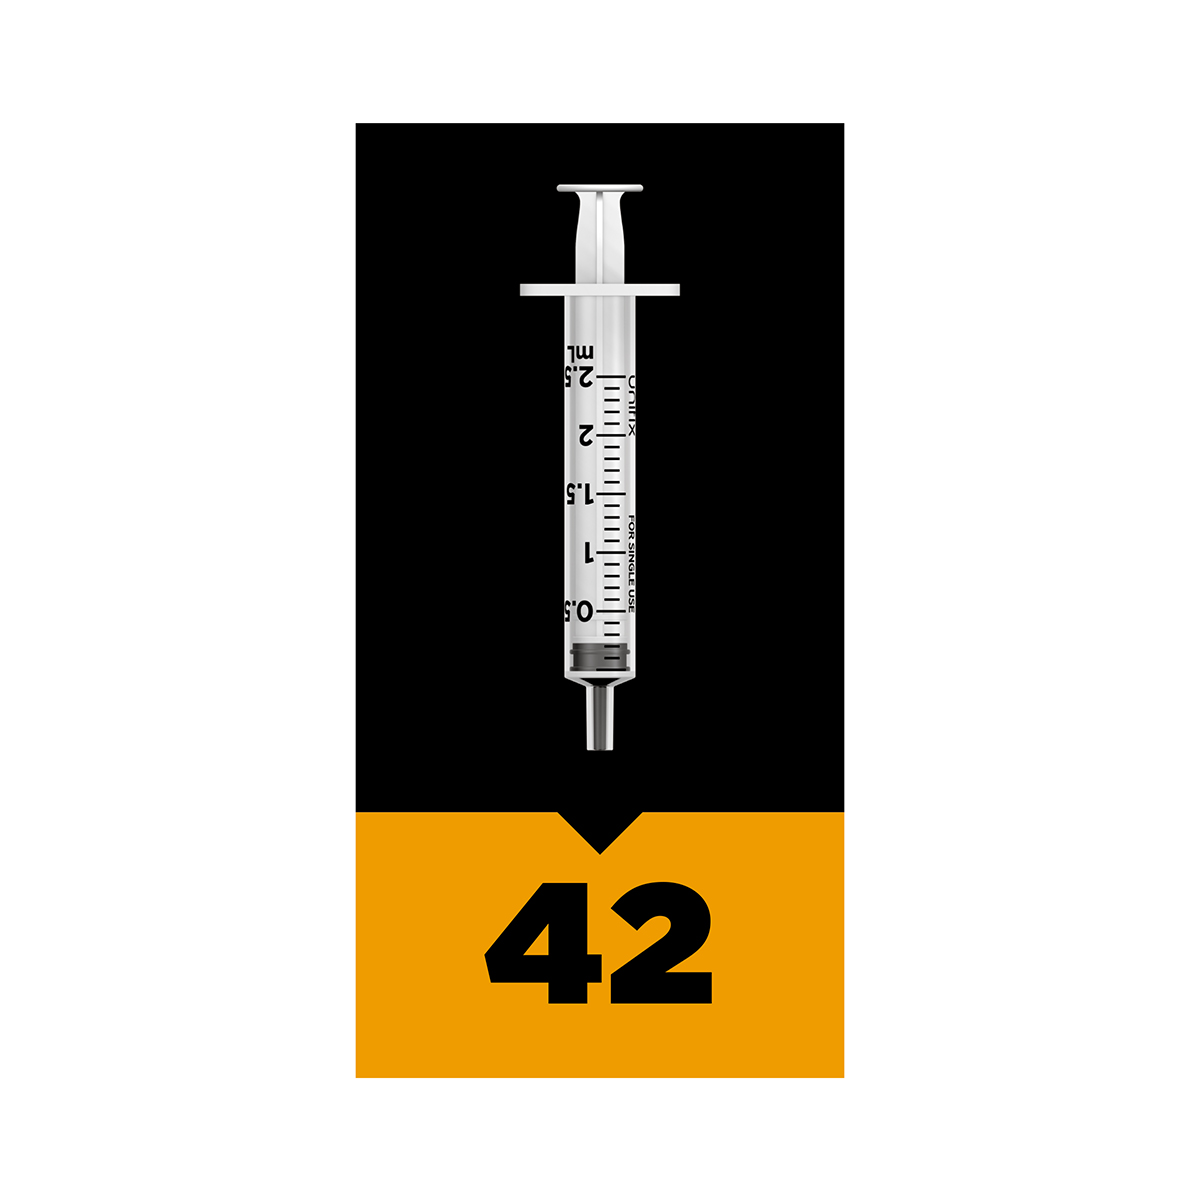 Steroid 12 week cycle kit | Injection every other day or multi-cycle | 42 syringes